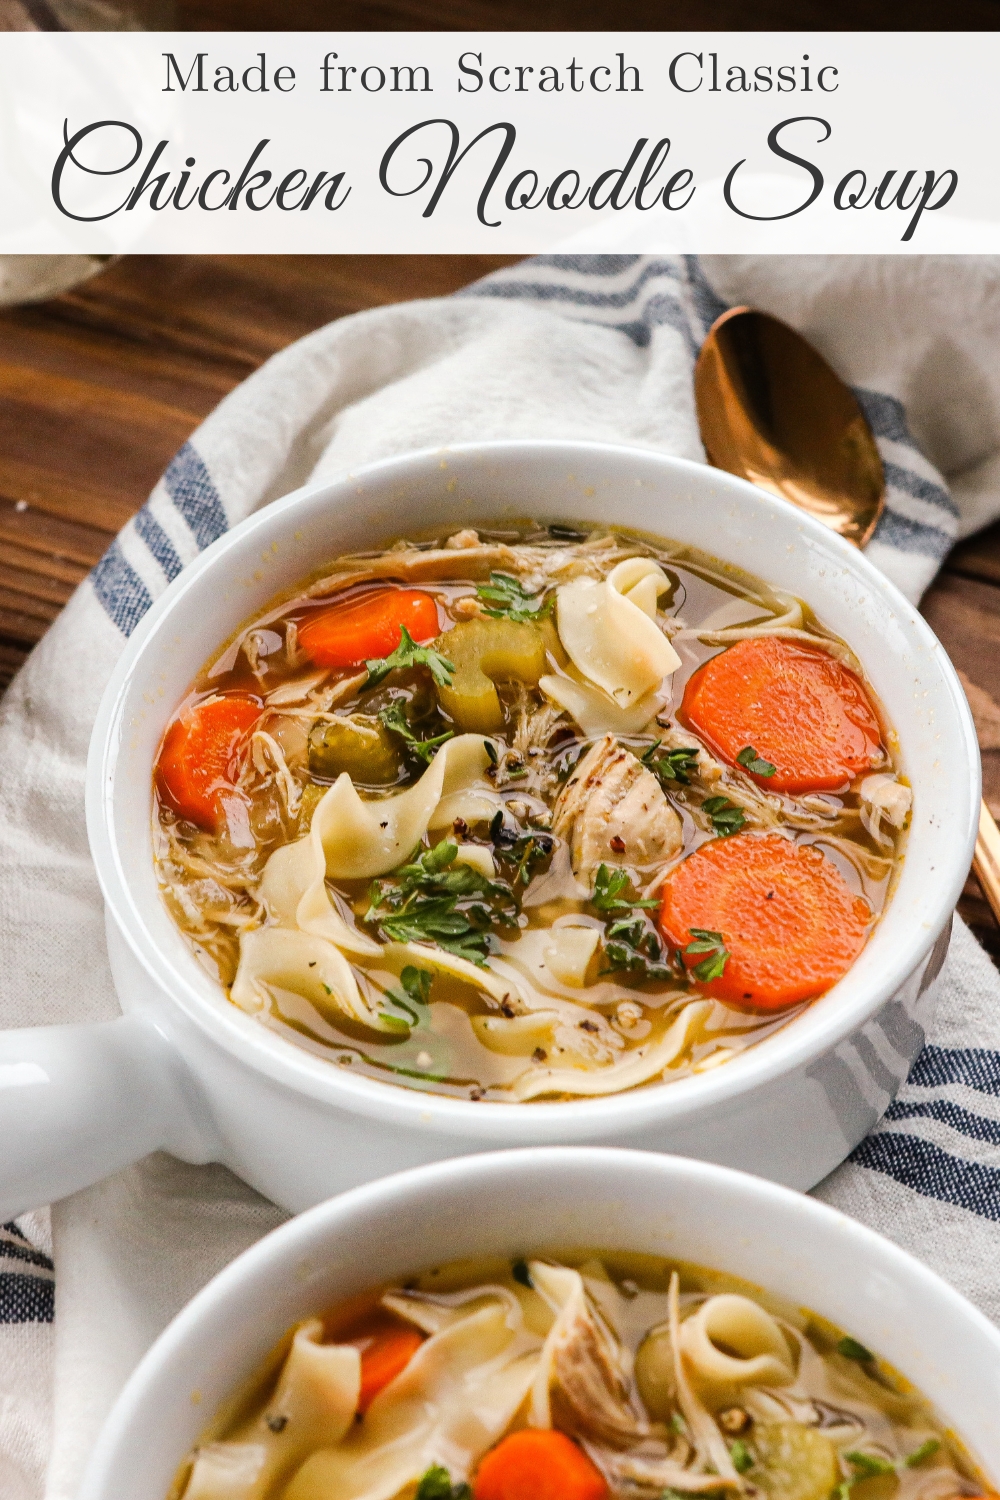 Homemade Chicken Noodle Soup with egg noodles